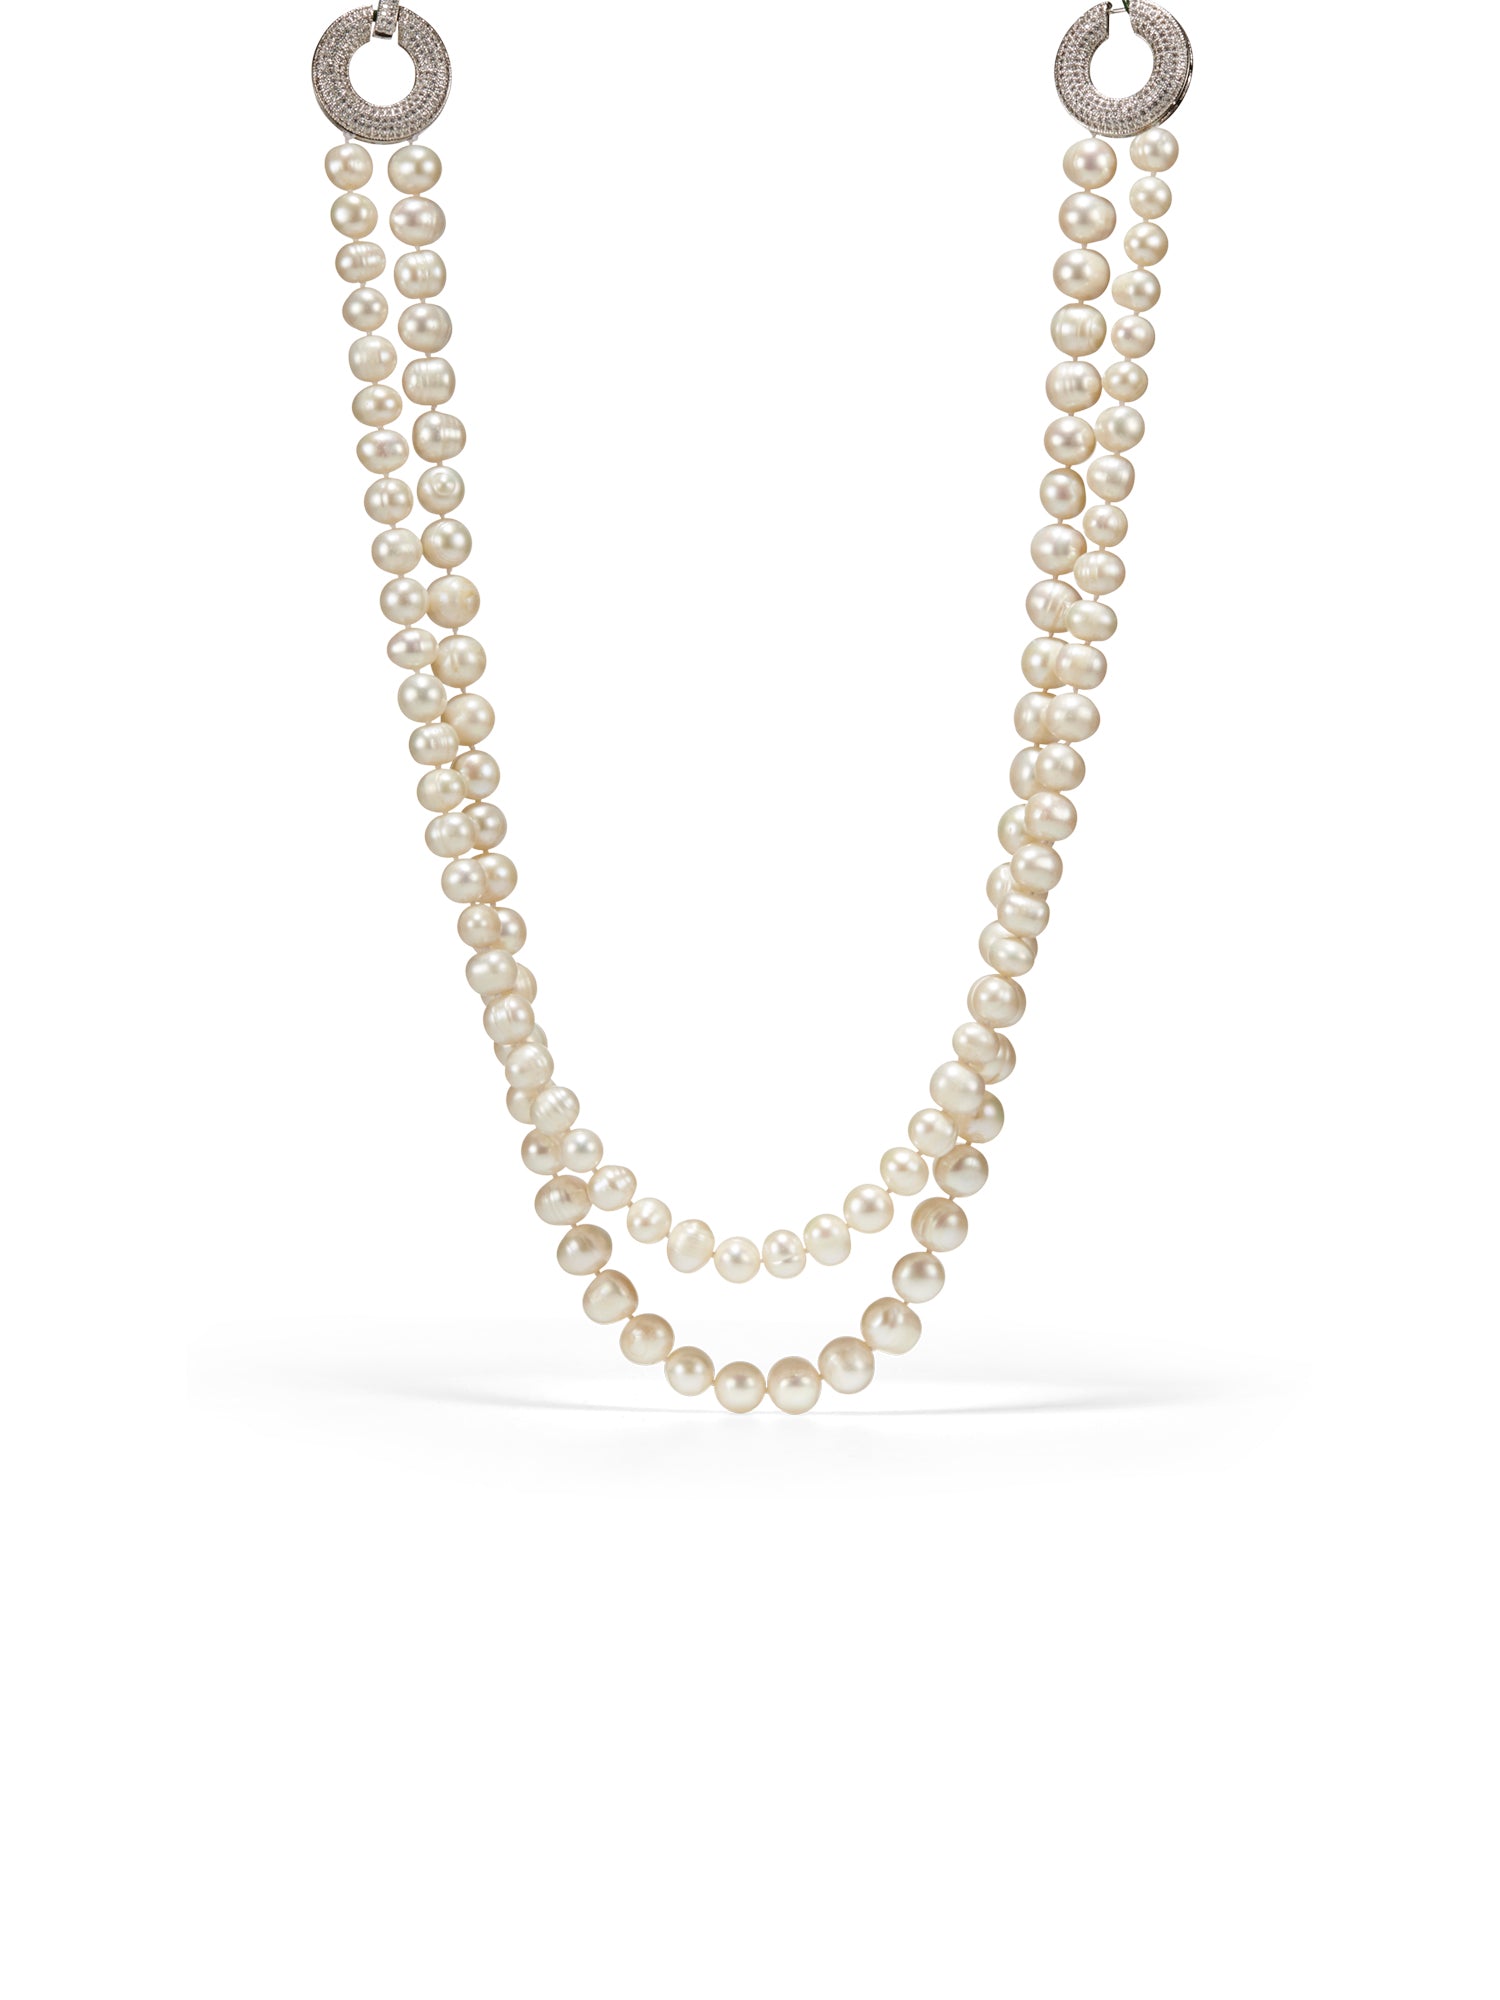 7.0-7.5mm White Freshwater Cultured Pearl Double Strand Necklace with 14K  Gold Clasp